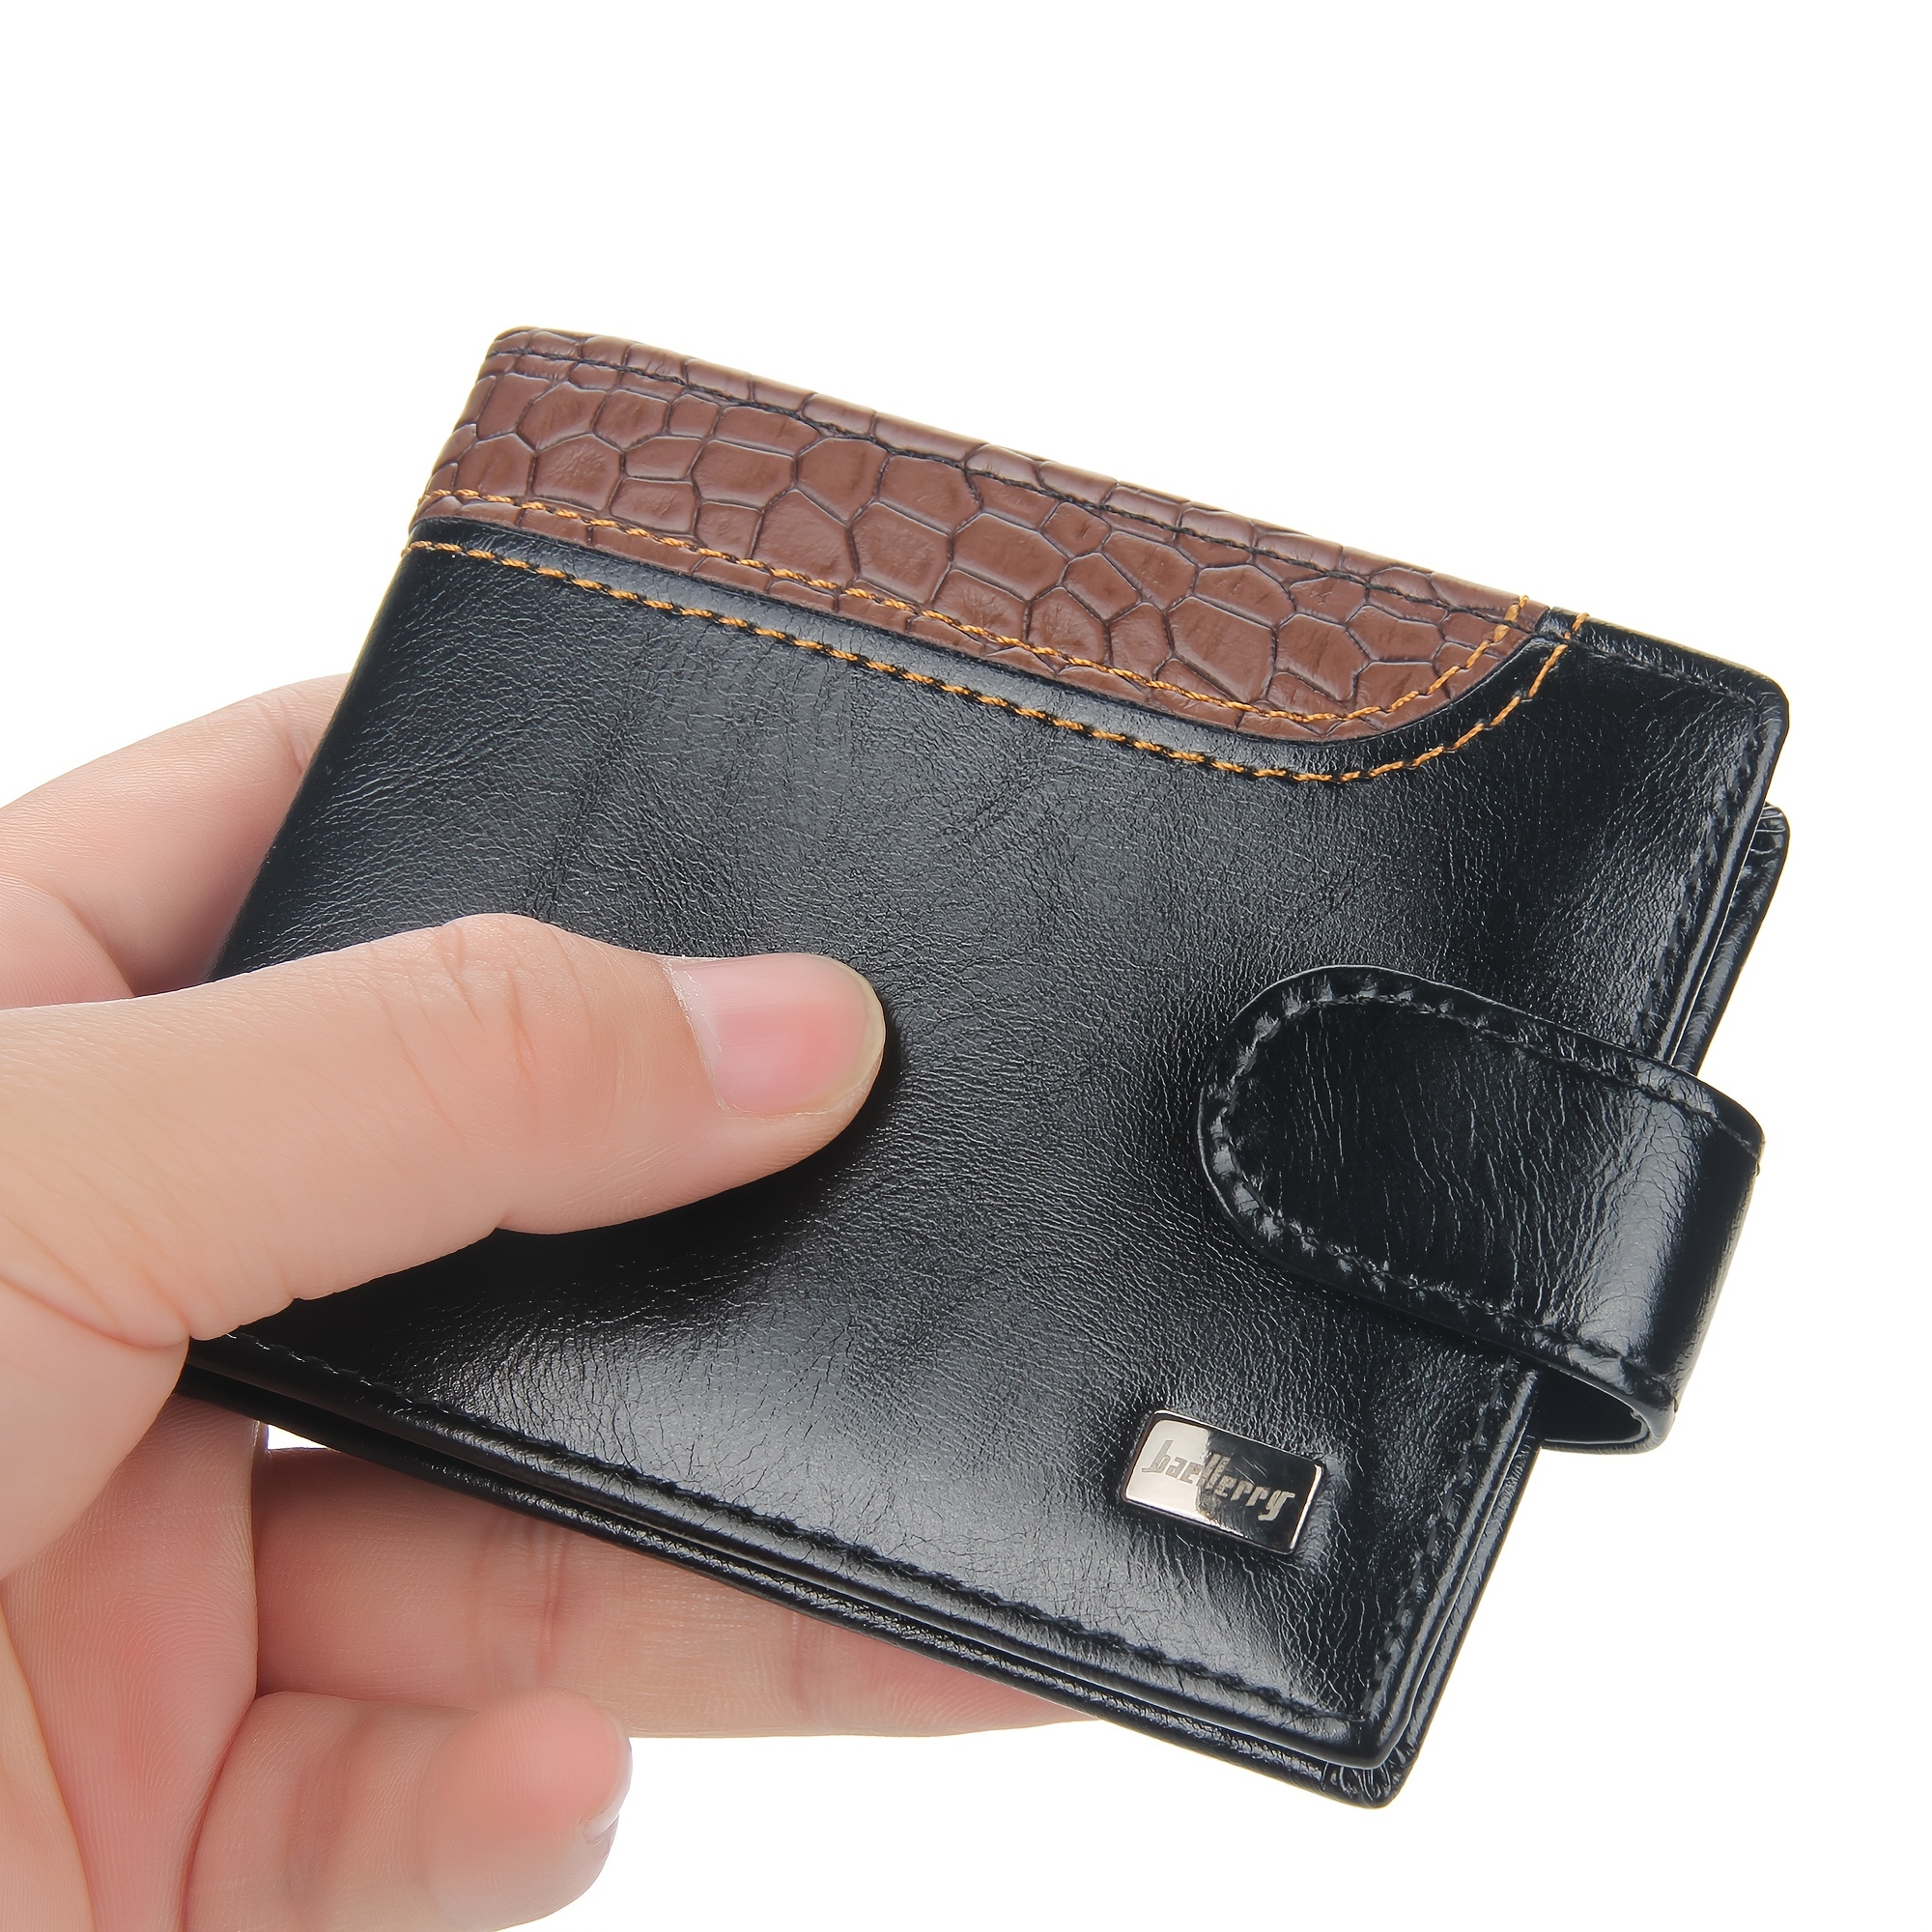 PU Leather Women Wallet Hasp Small and Slim Coin Pocket Purse